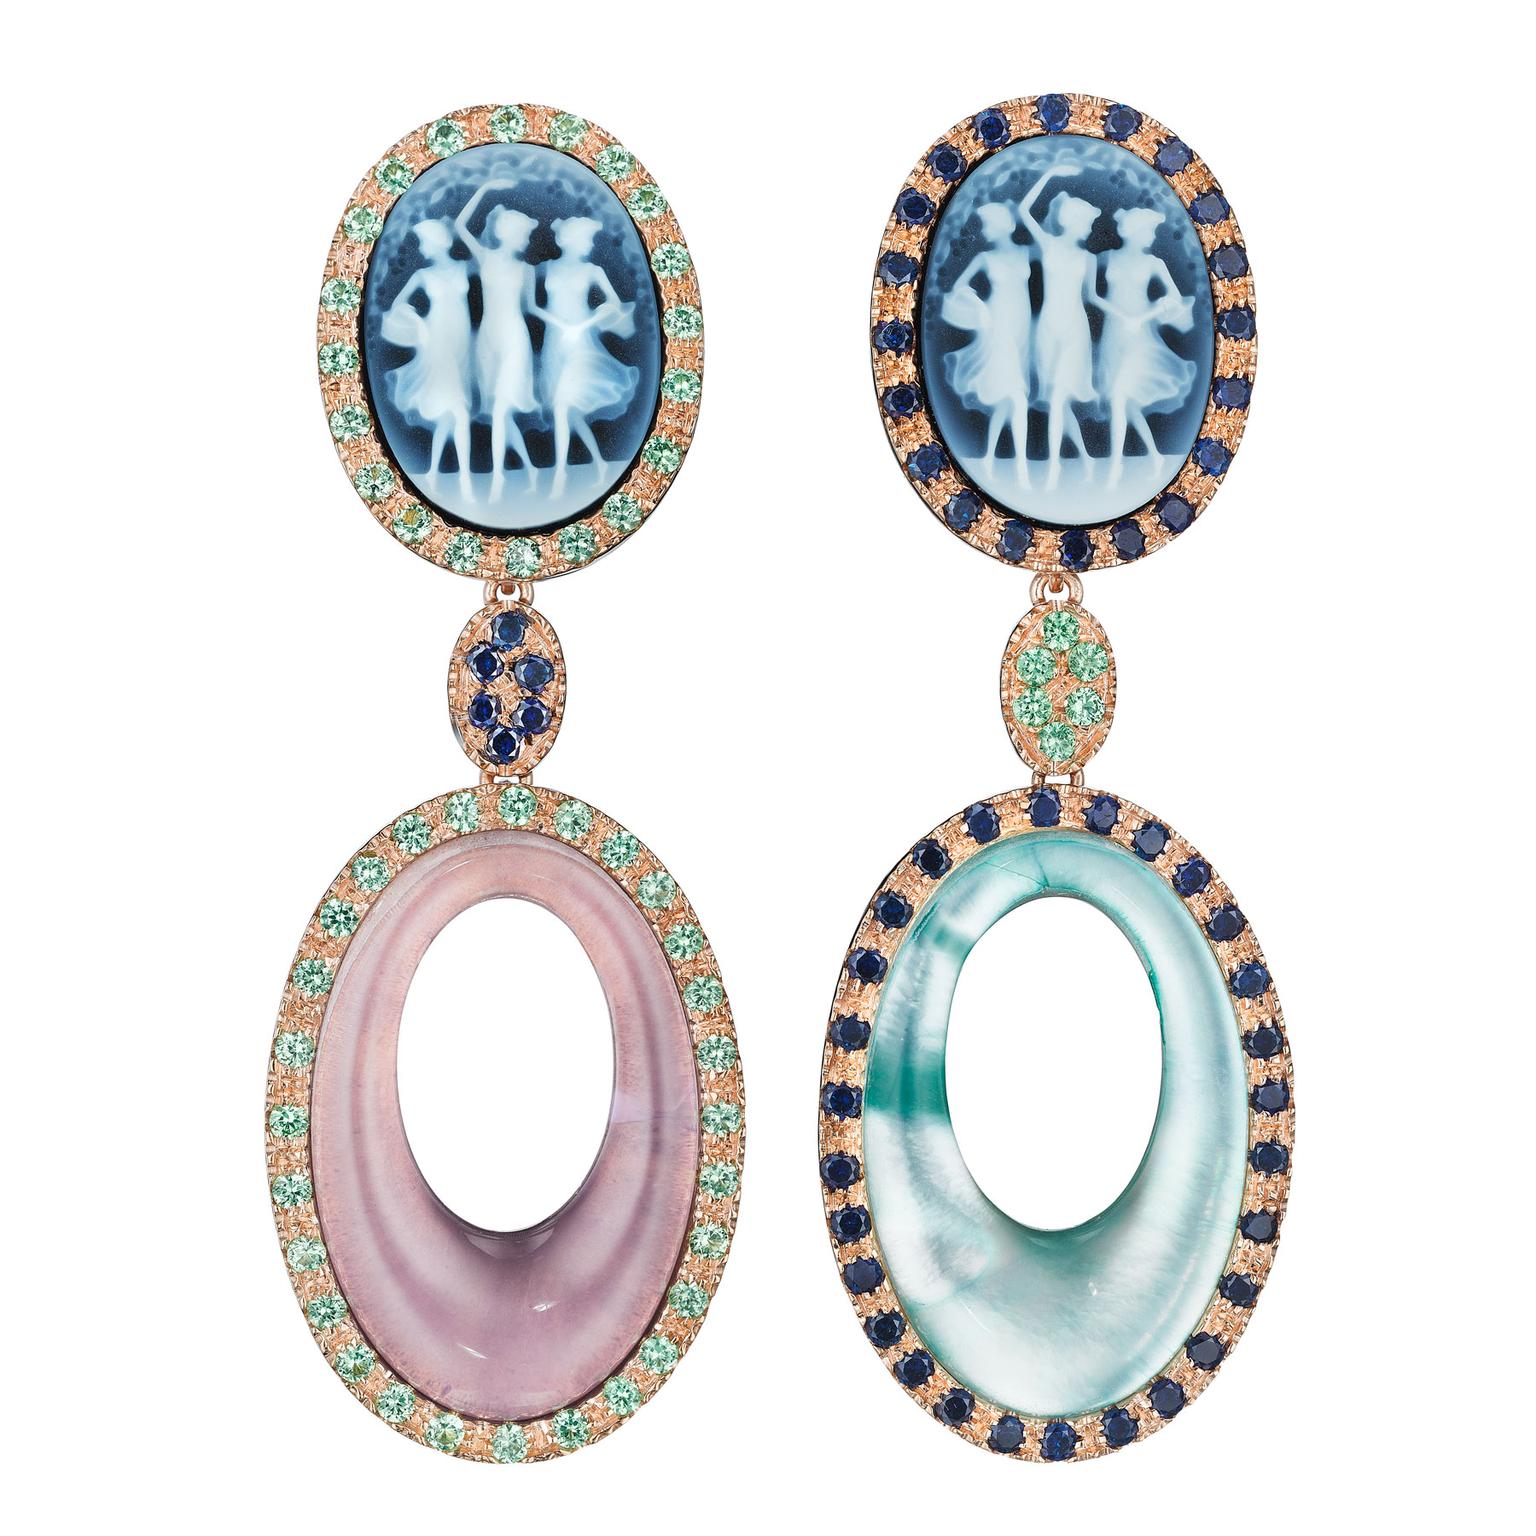 Amedeo Couture Muse Cameo earrings